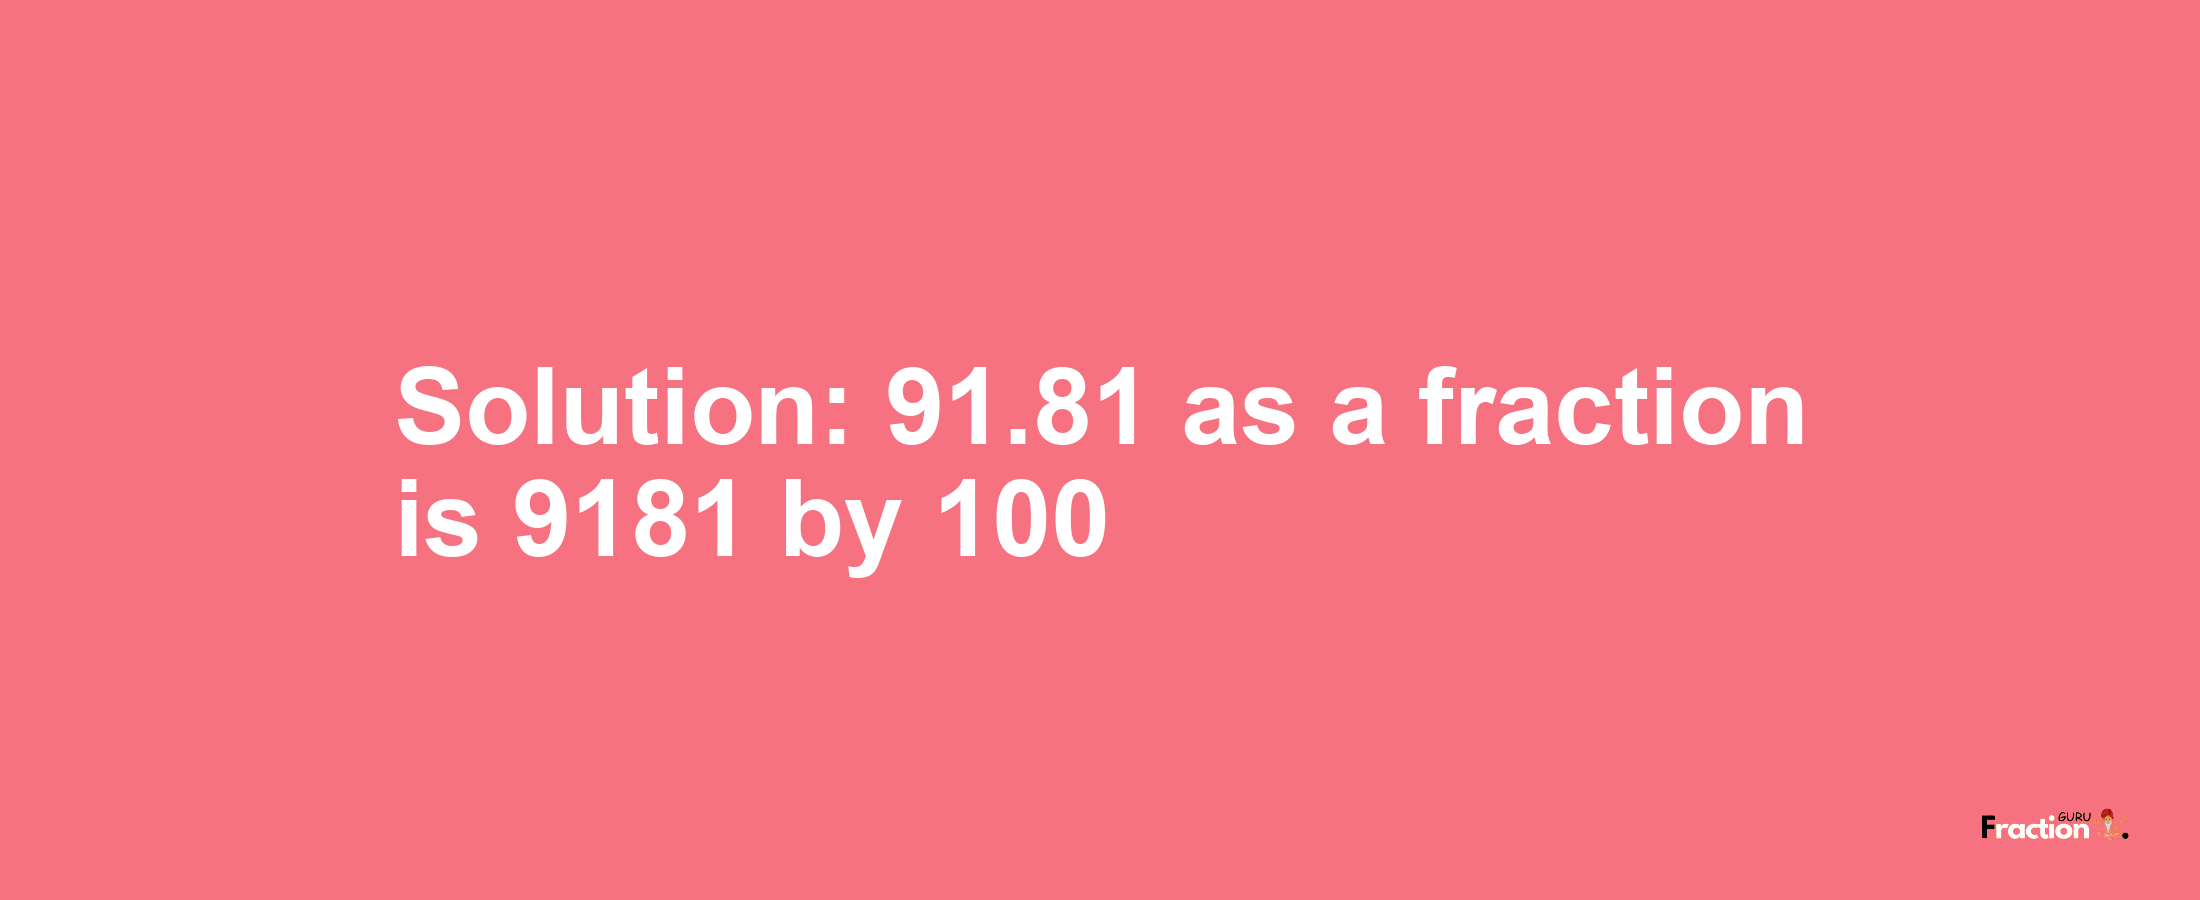 Solution:91.81 as a fraction is 9181/100